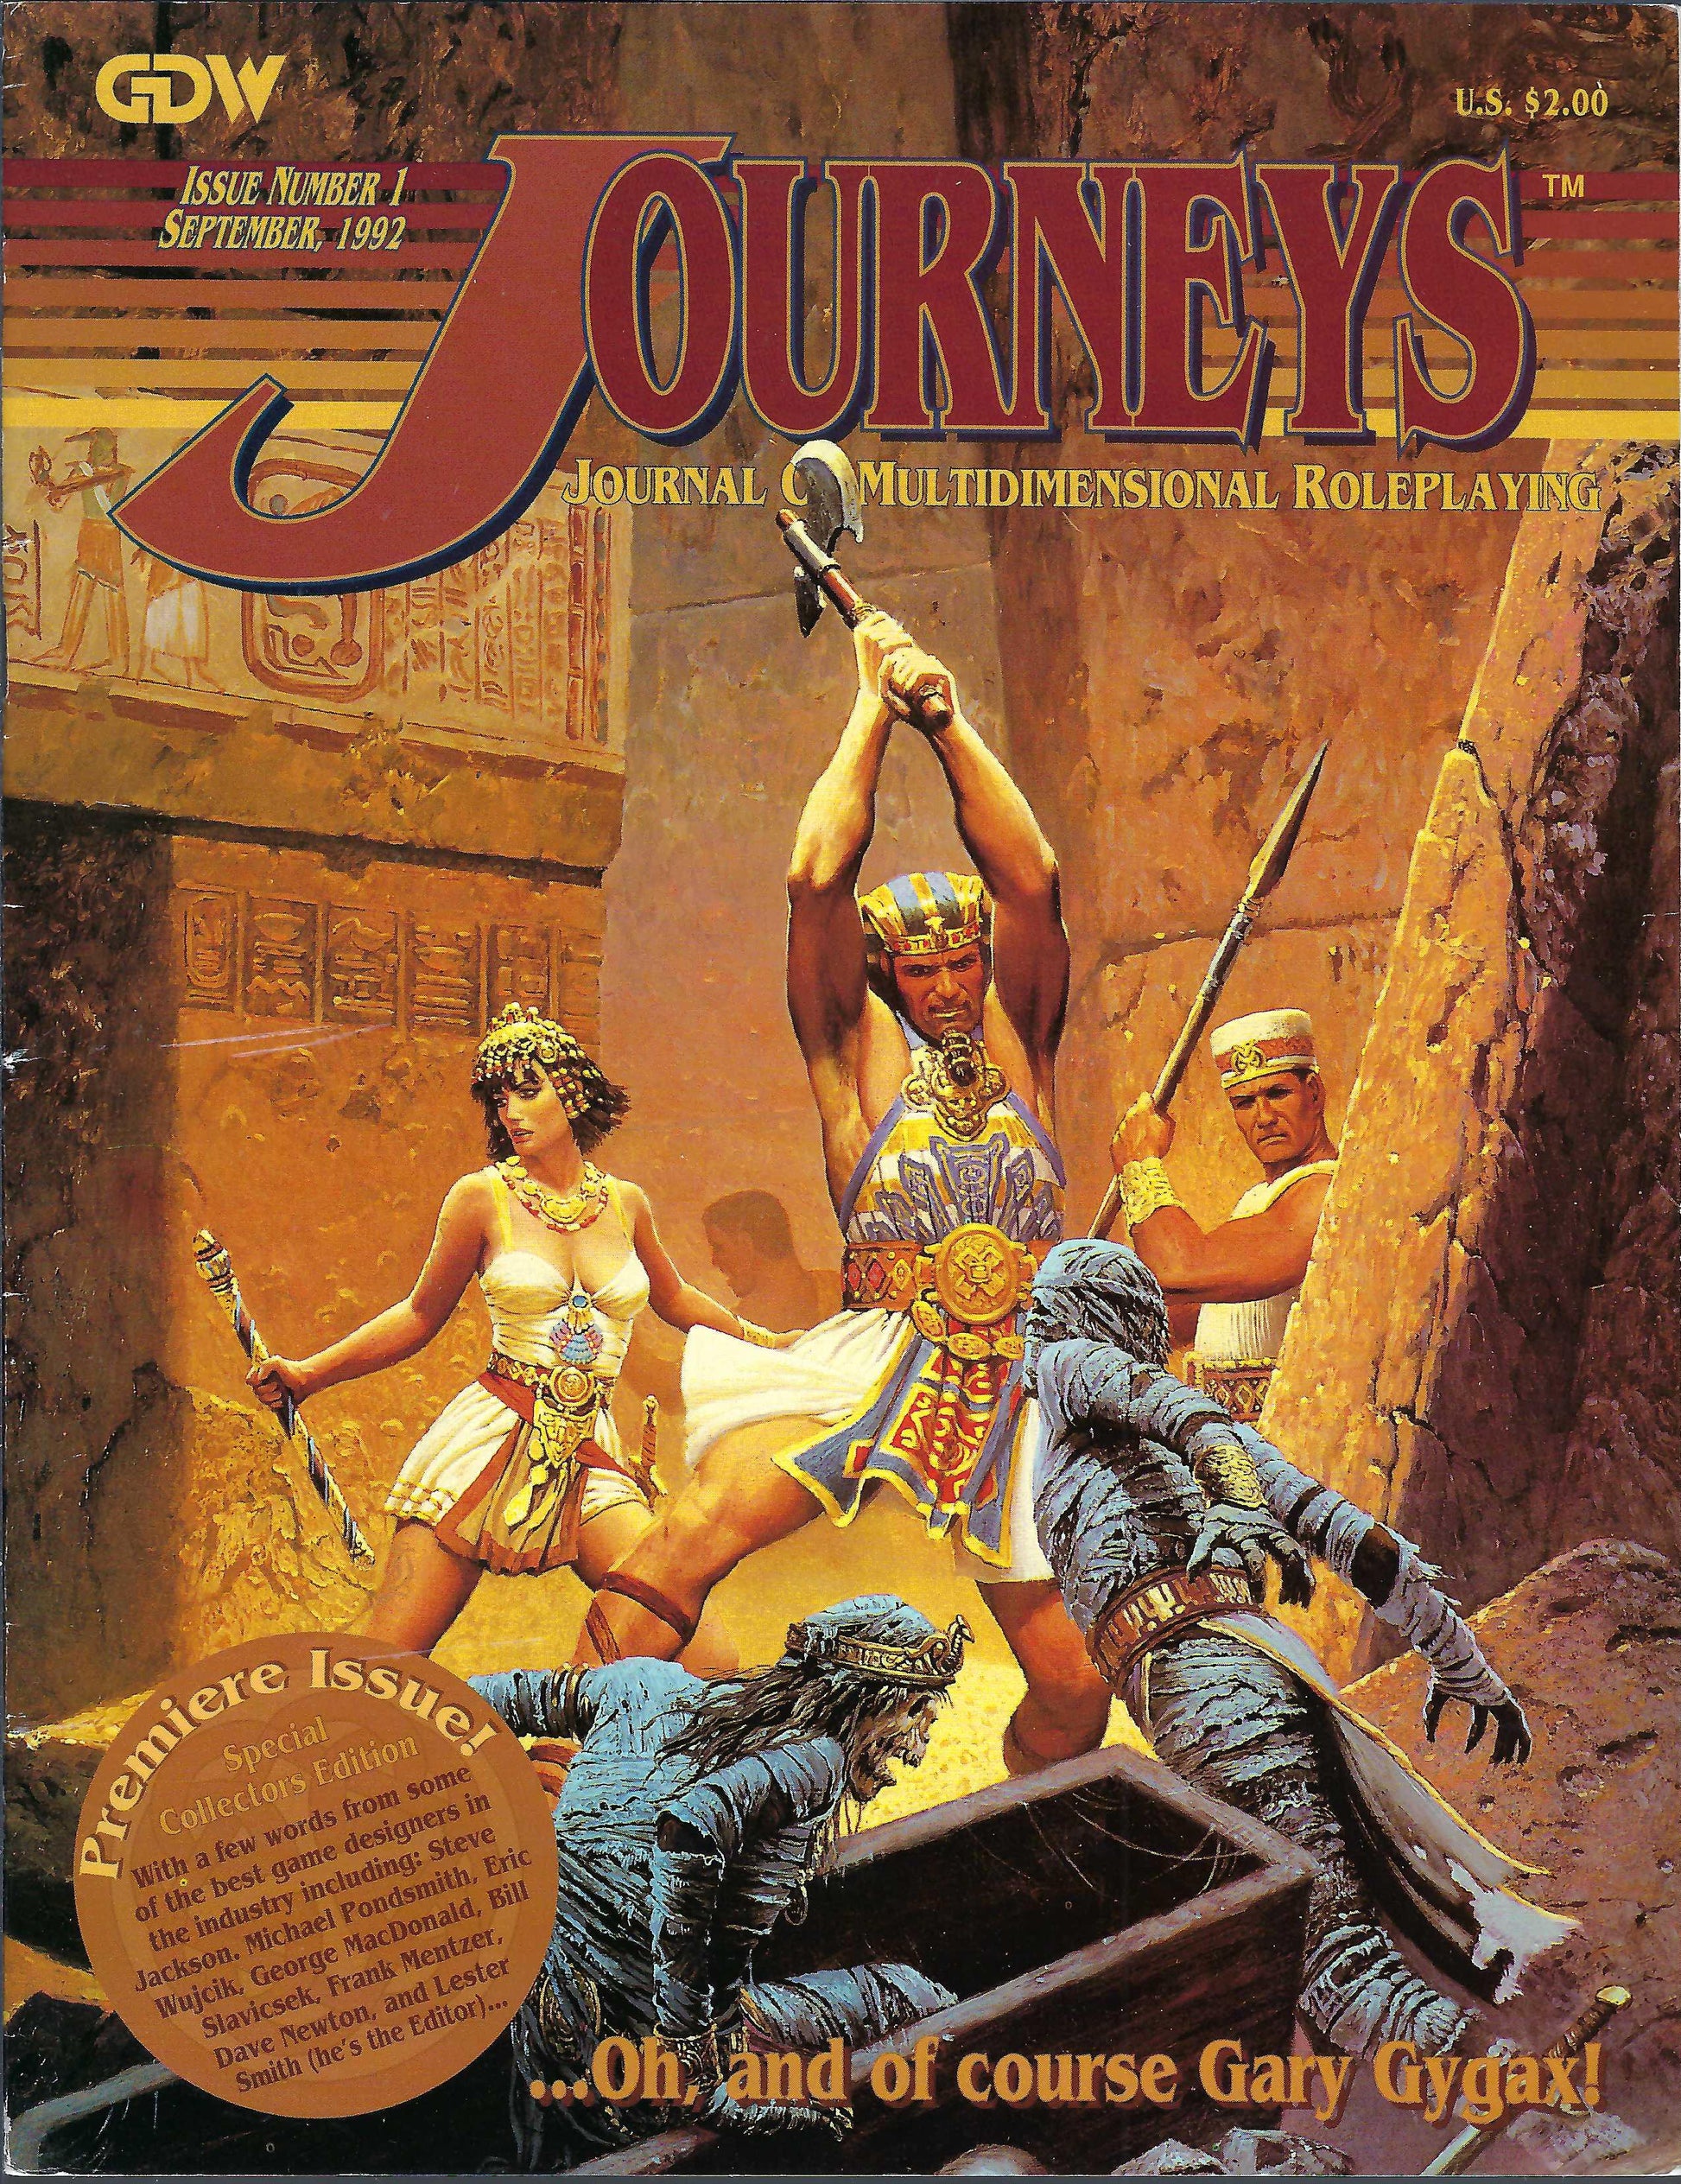 Journeys Journal of Multidimensional Roleplaying front cover